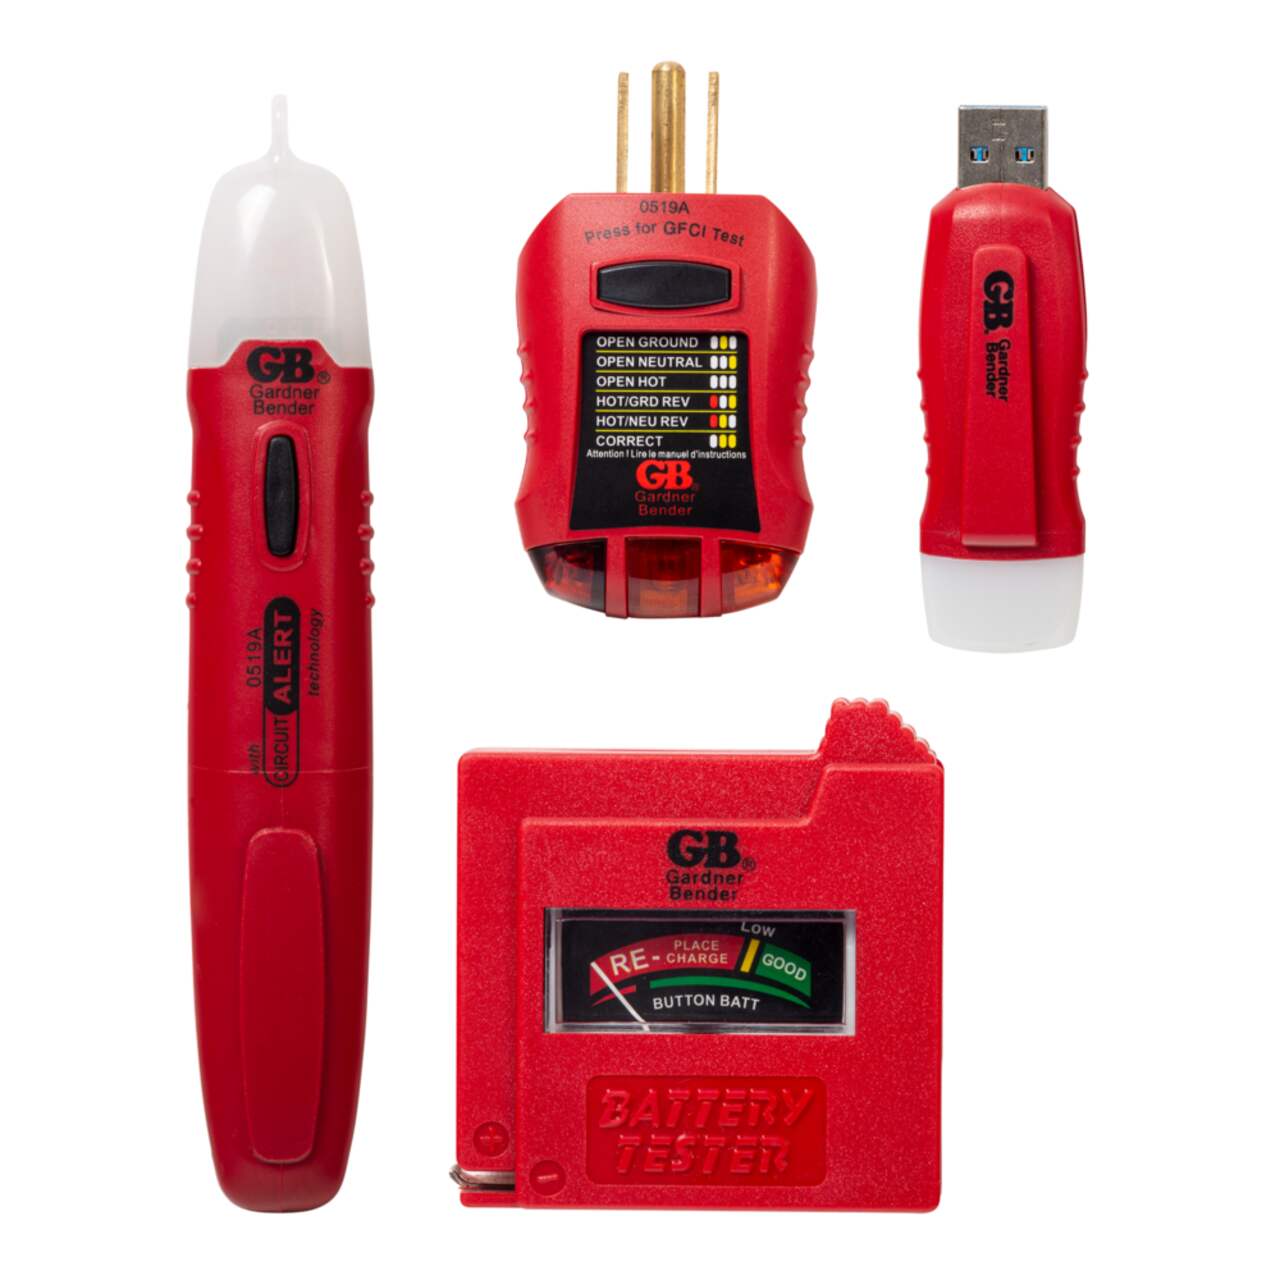 Electrical testers, voltage testers, and circuit testers